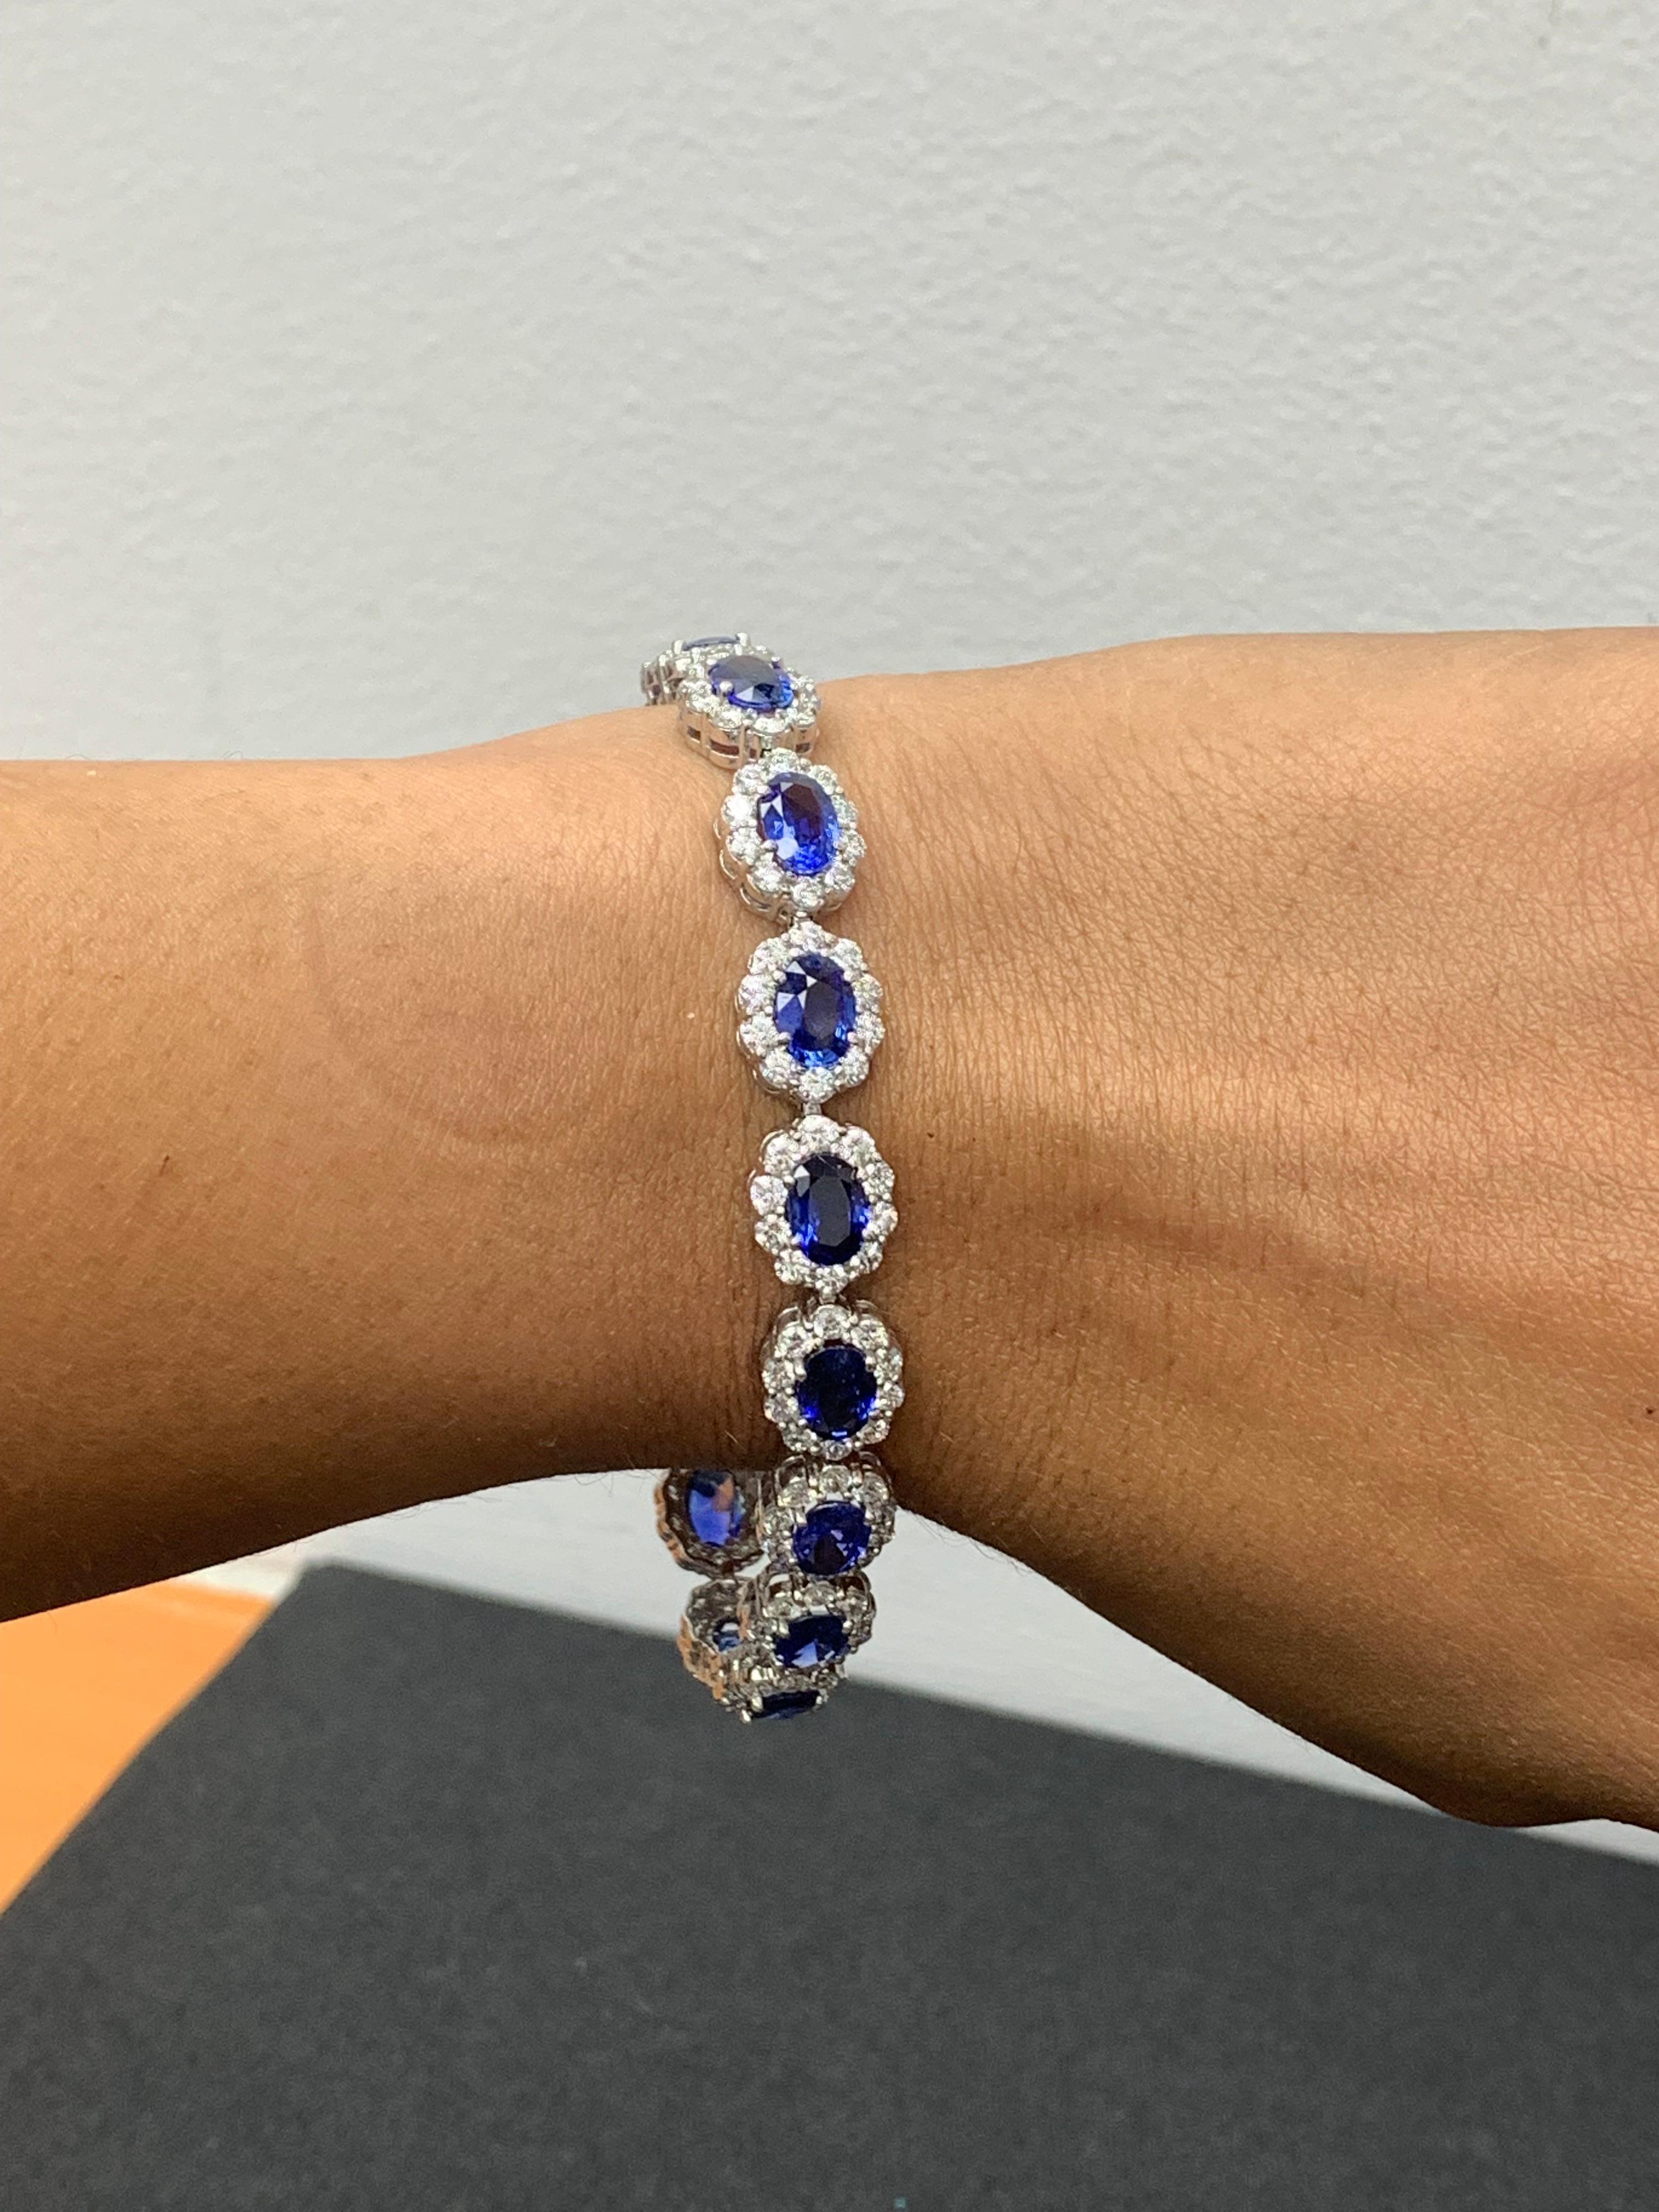 13.88 Carat Oval Cut Blue Sapphire and Diamond Halo Bracelet in 14K White Gold For Sale 5